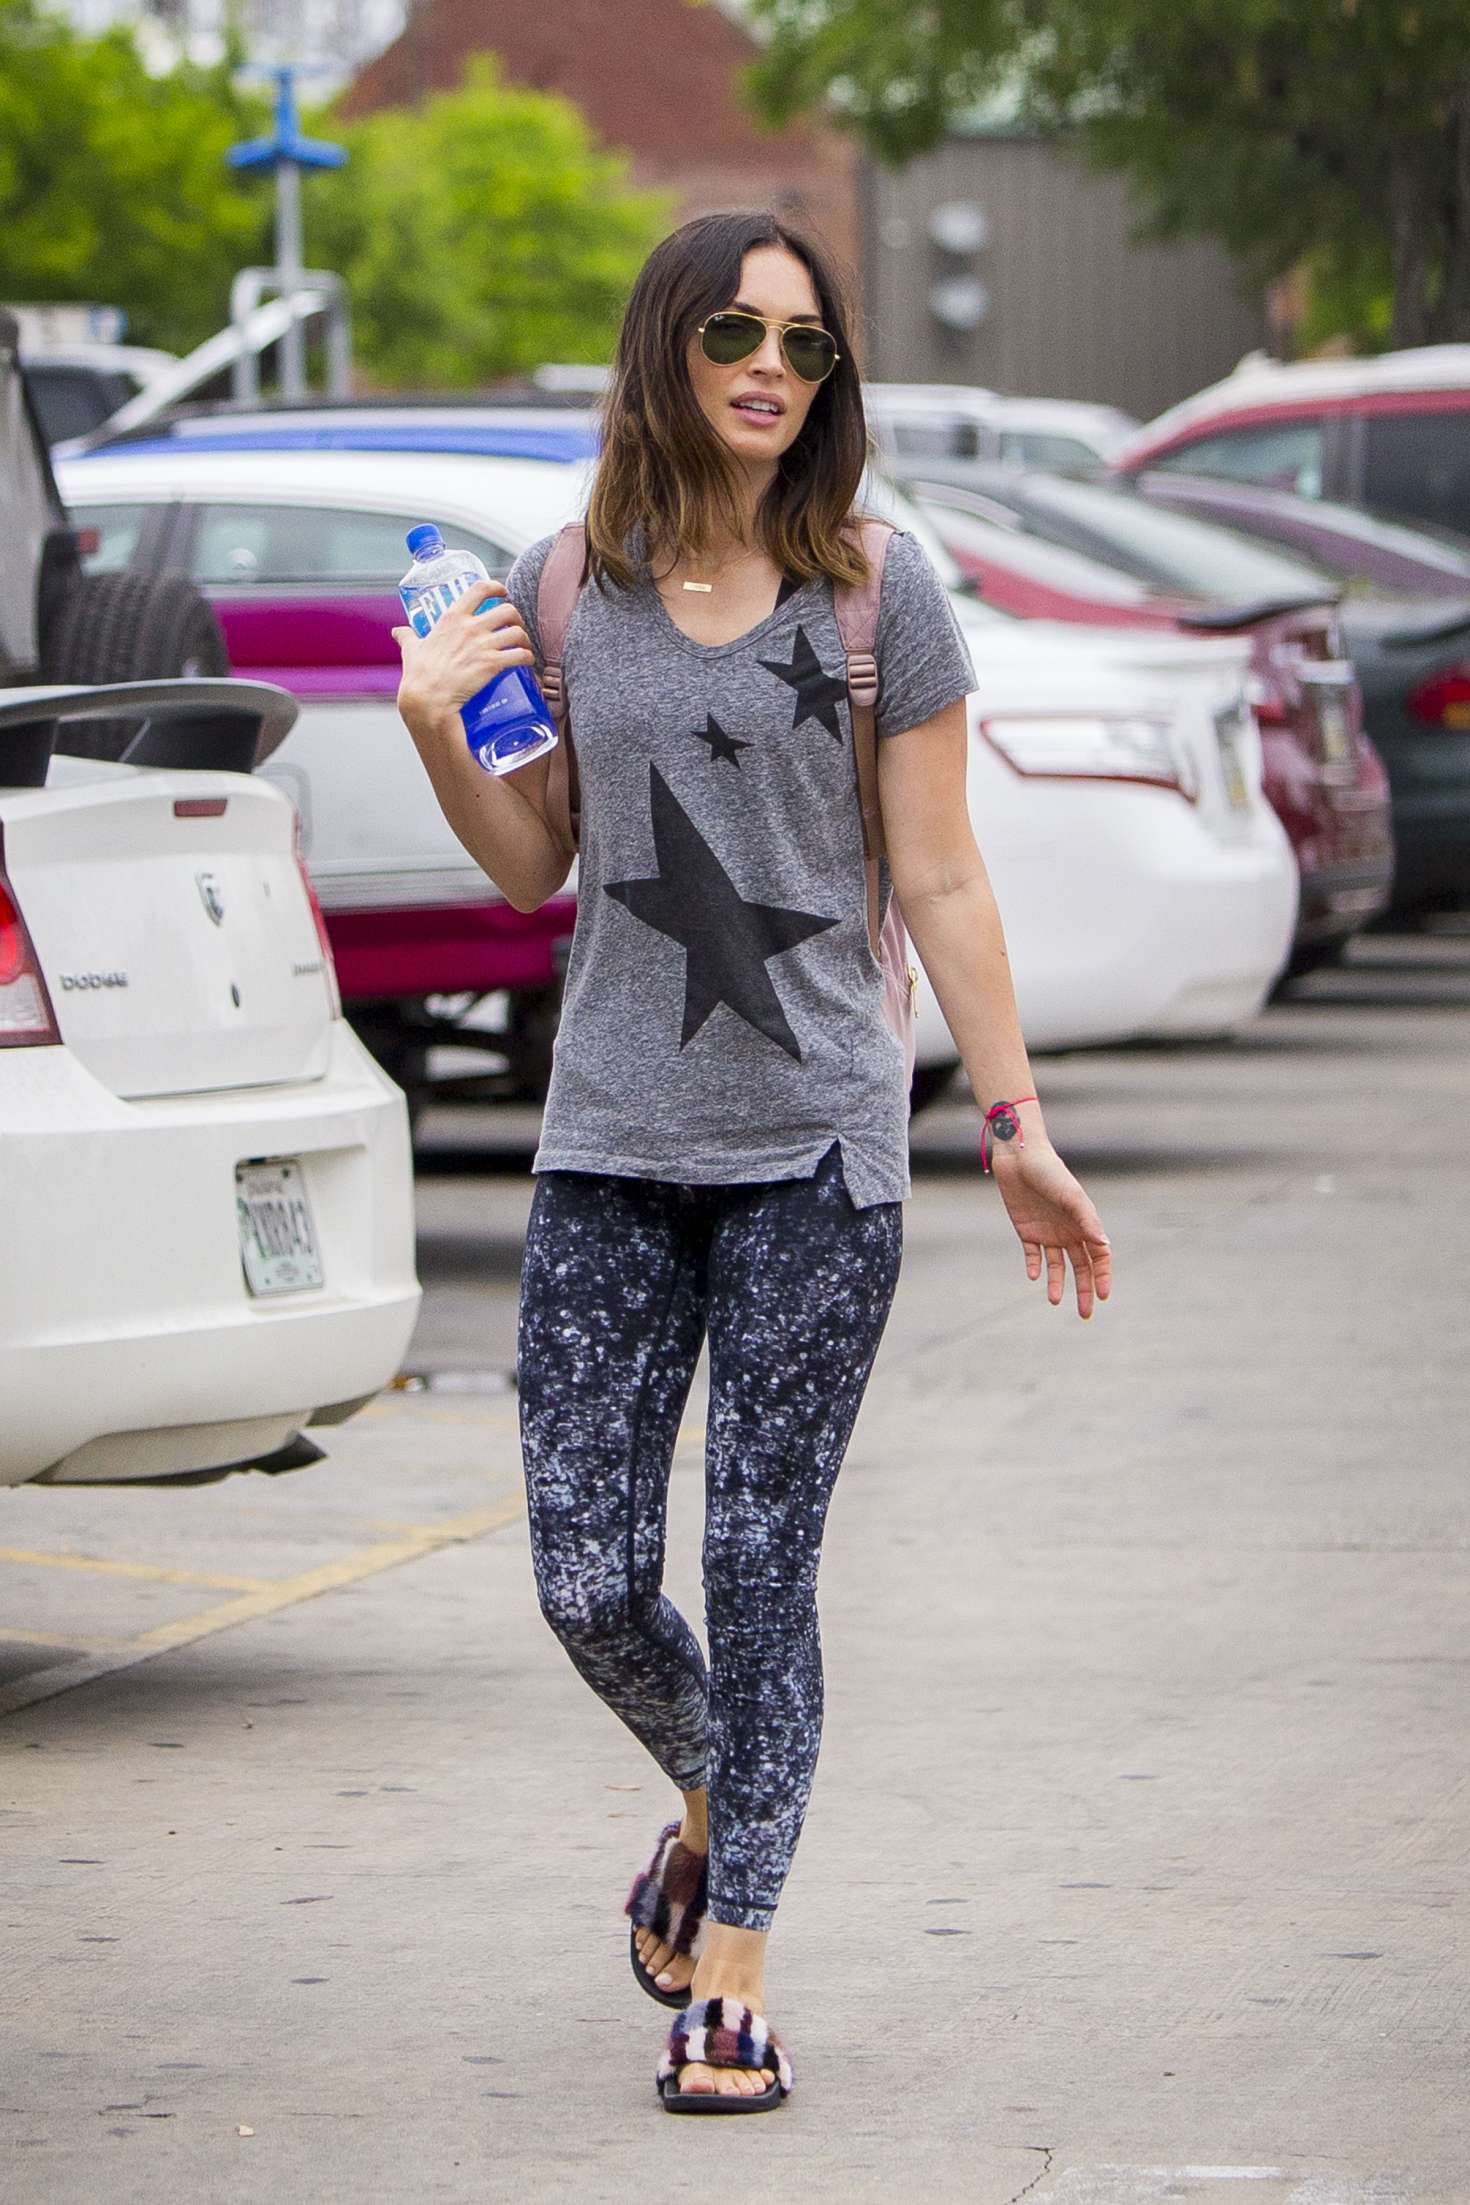 Megan Fox in Tights â€“ Shhopping in New Orleans